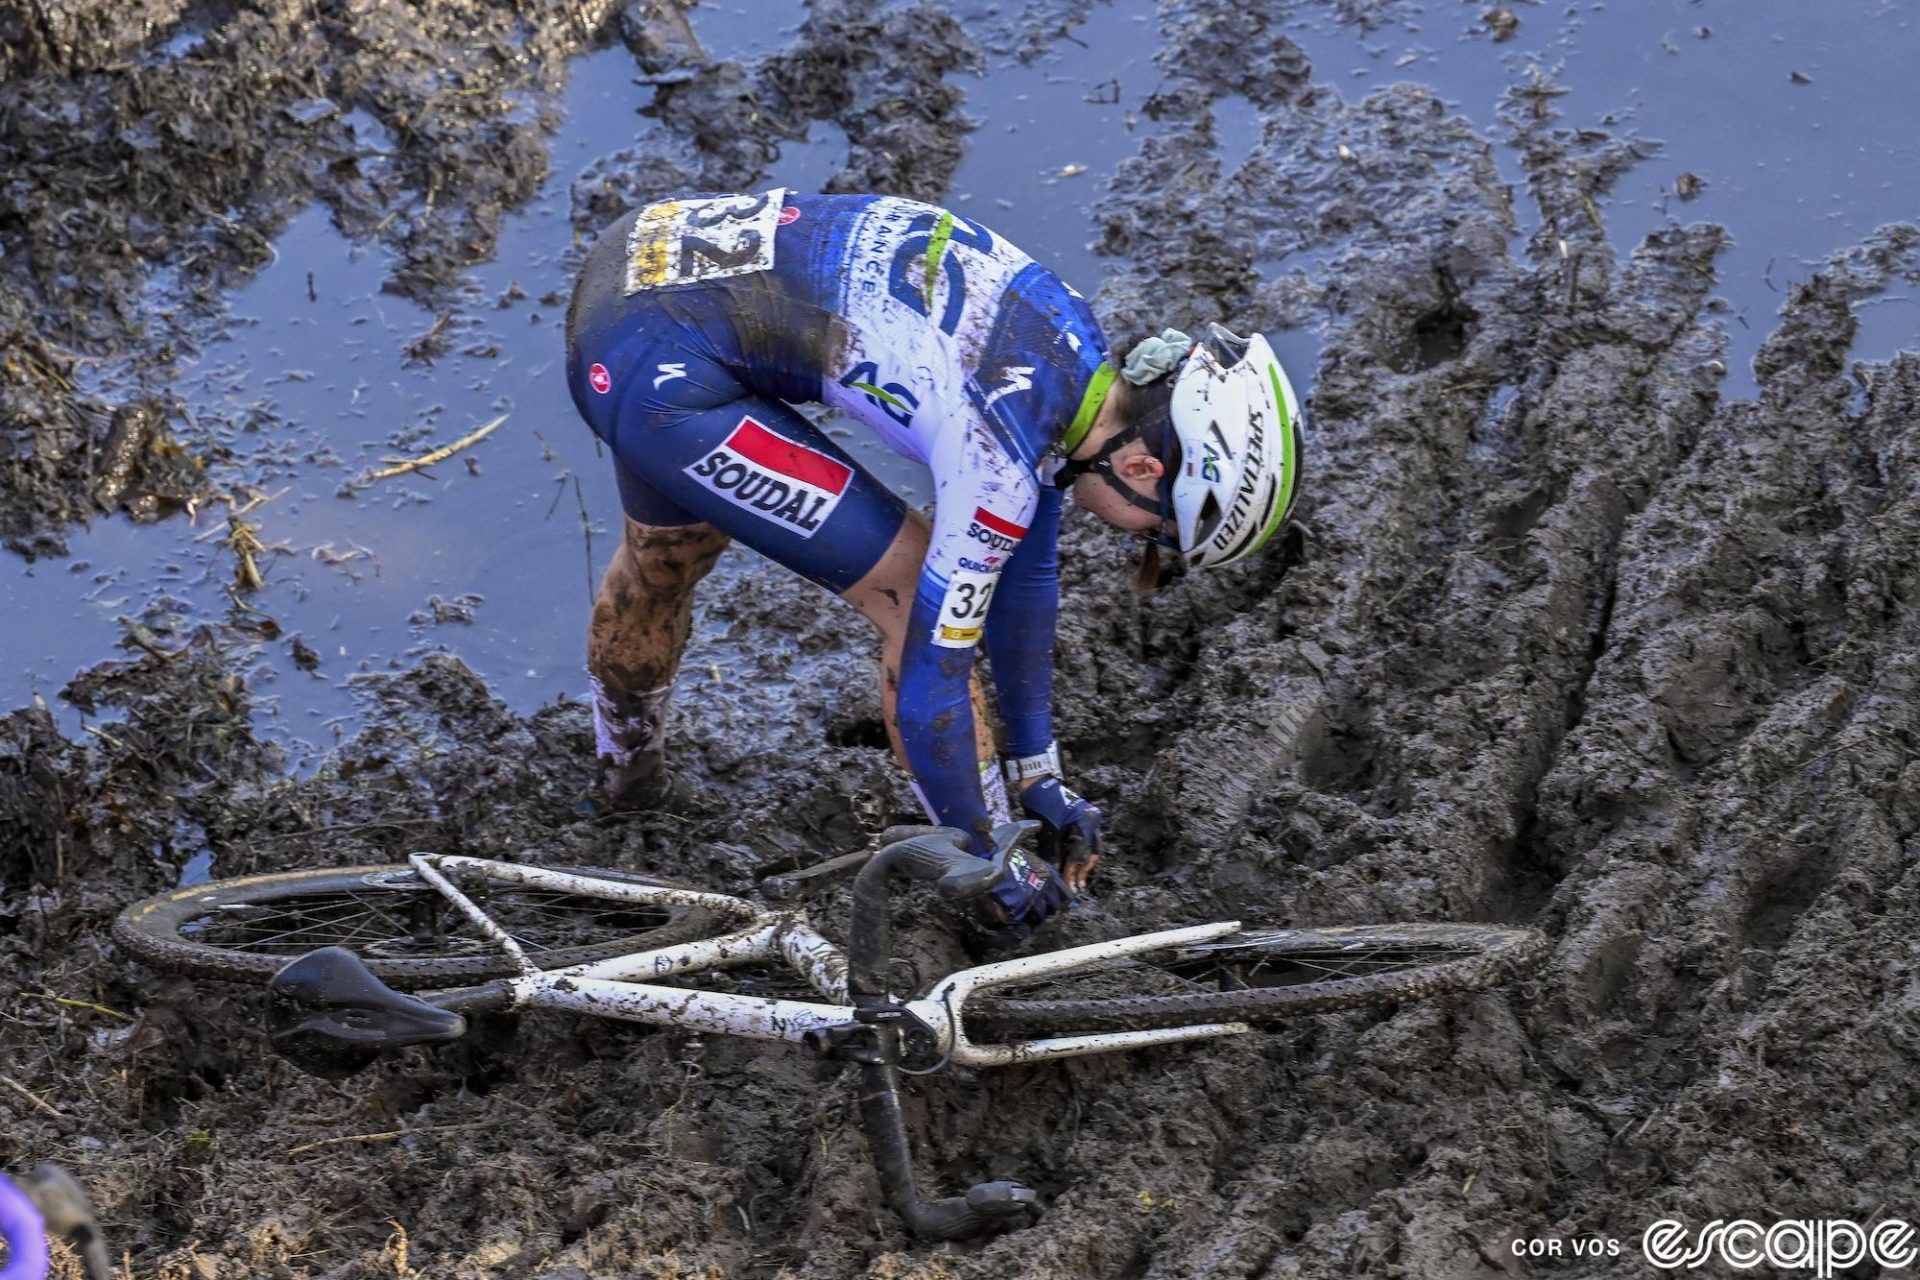 Margot Marasco leans over to try to fix her right shoe at the Superprestige Niel. She's standing in deep, watery mud and her shoe is covered in muck.